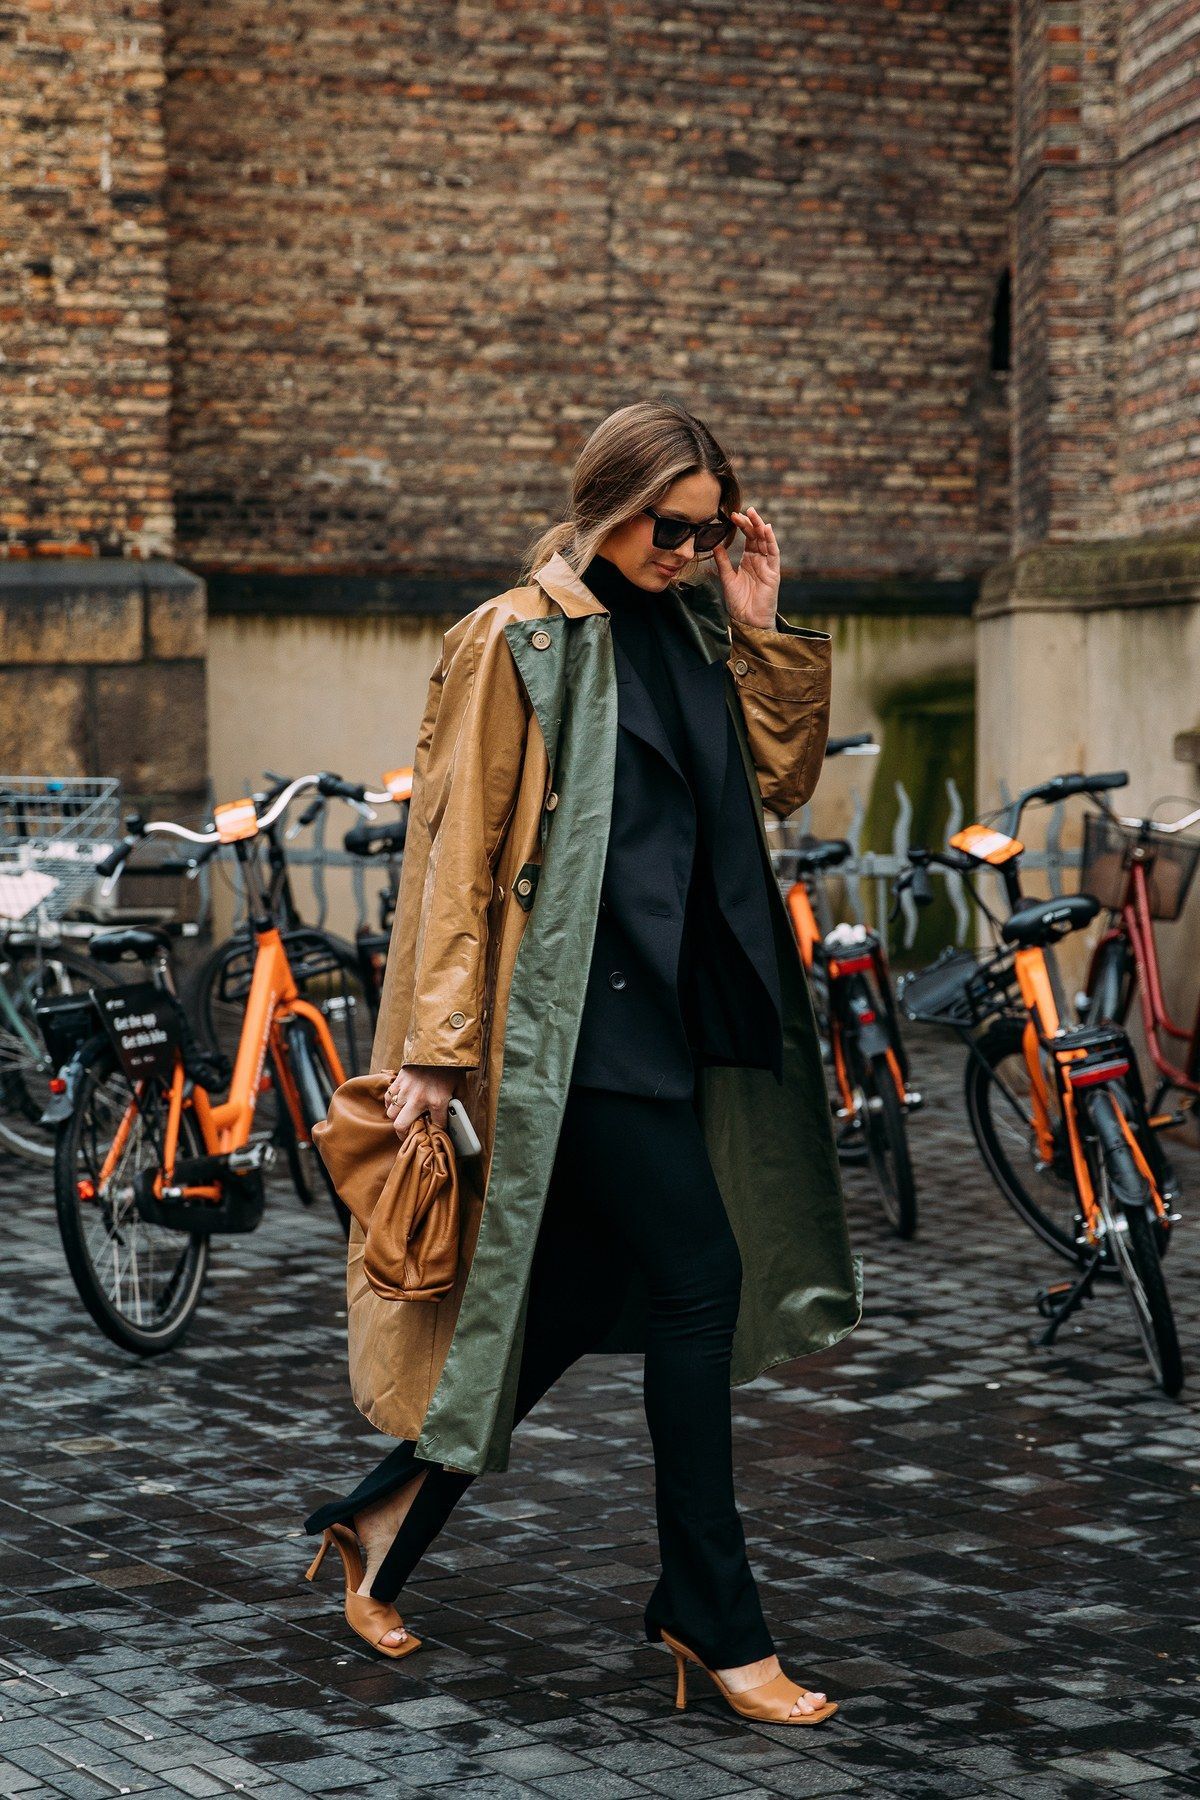 The Best Street-Style Photos From the Fall 2020 Shows at Copenhagen Fashion Week - The Best Street-Style Photos From the Fall 2020 Shows at Copenhagen Fashion Week -   18 style Street classy ideas